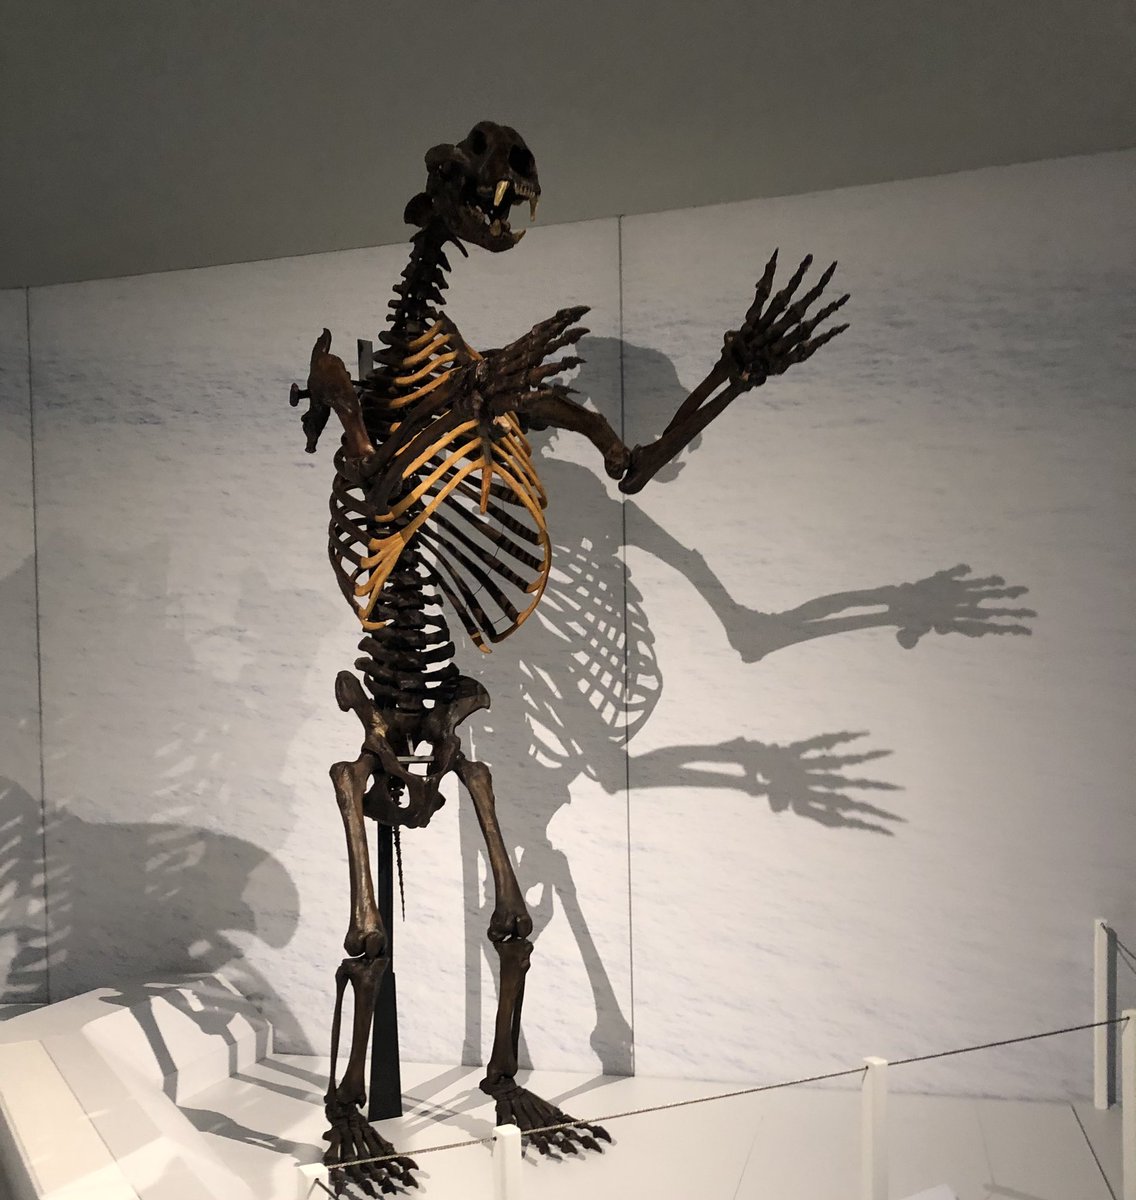 Short-faced bear Weighing in at over 1,200 kg, these behemoths were one of the largest mammals known to exist. Their claw marks have been recorded on cave walls up to 15 feet high.